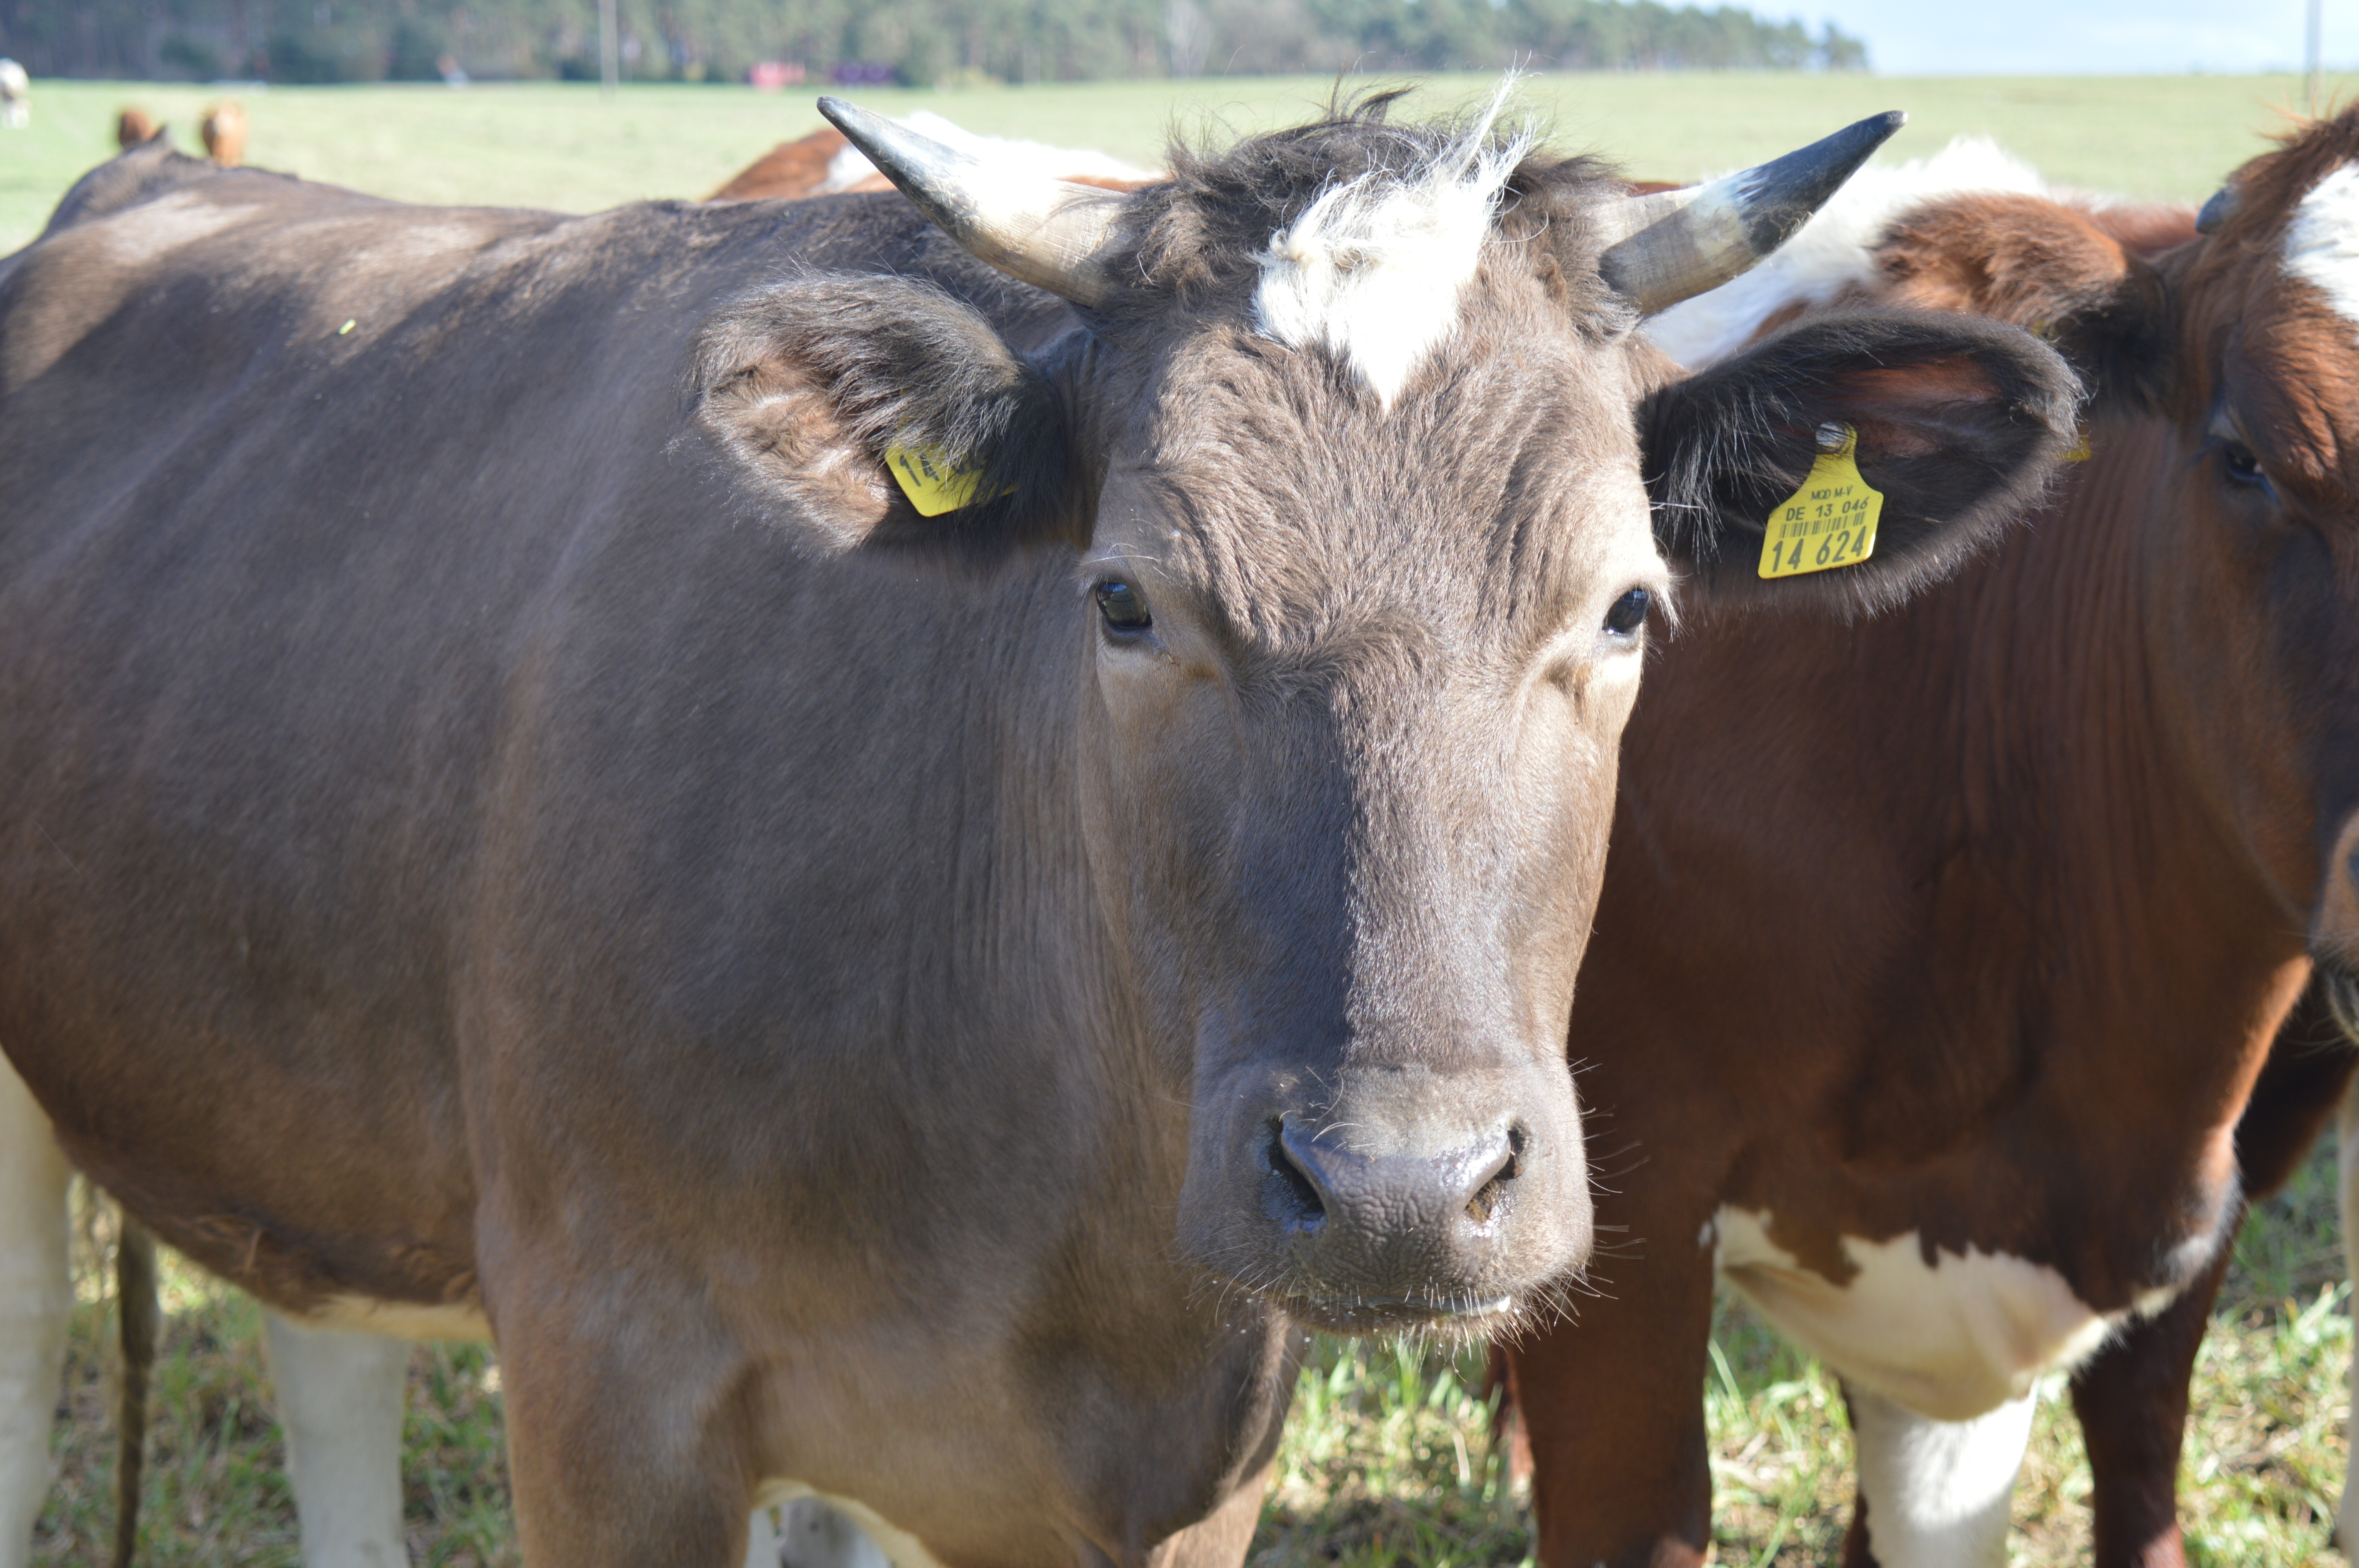 Cow, Beef, Horns, Pasture, Coupling, livestock, domestic animals